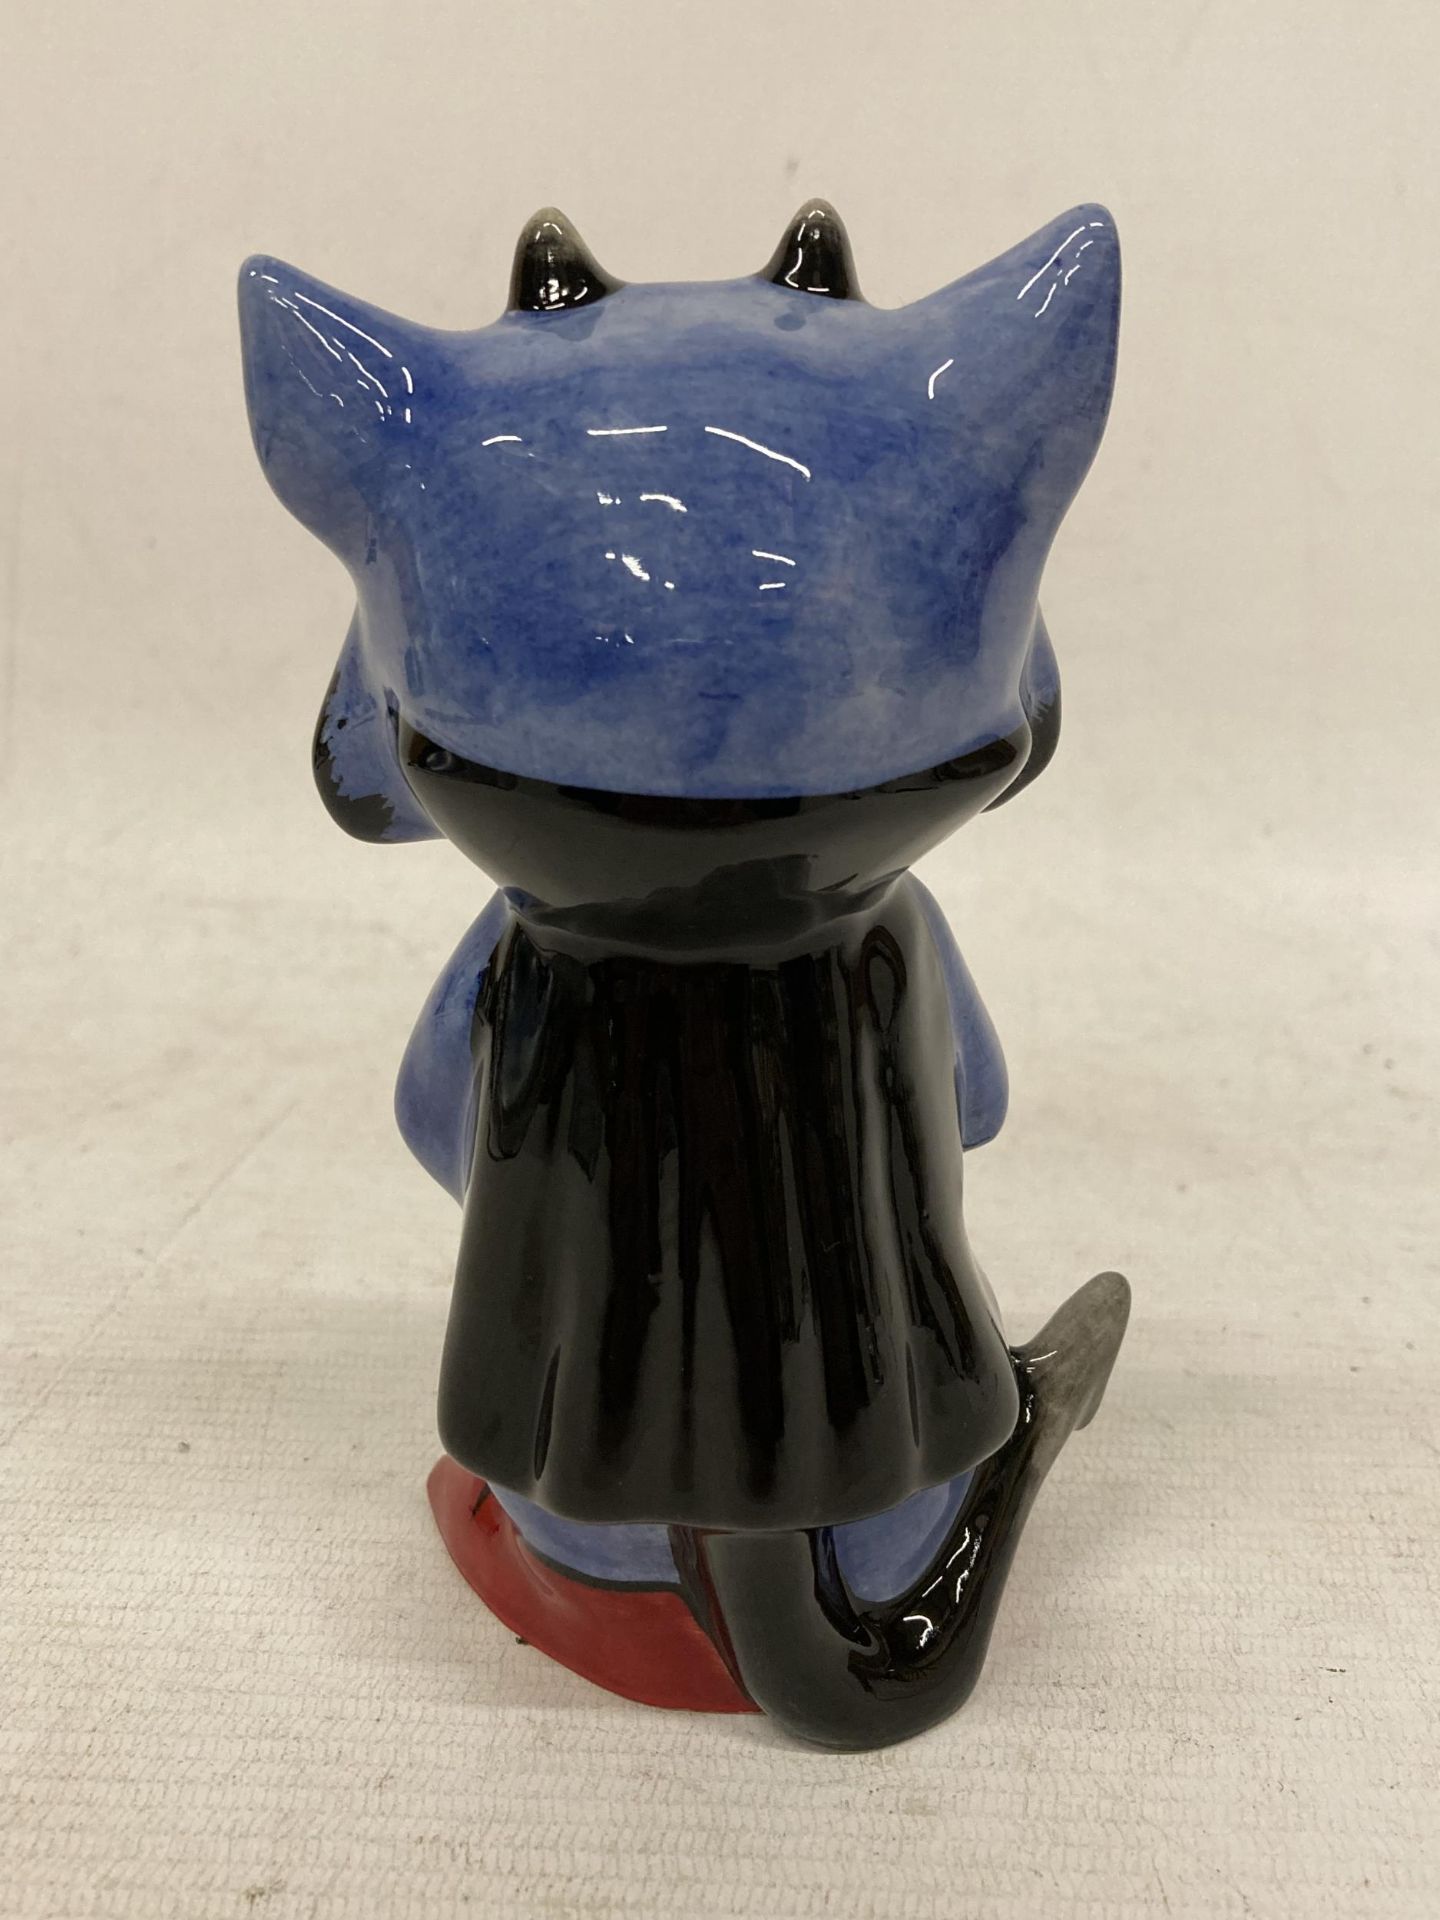 A LORNA BAILEY HAND PAINTED AND SIGNED DEVIL CAT - Image 2 of 3